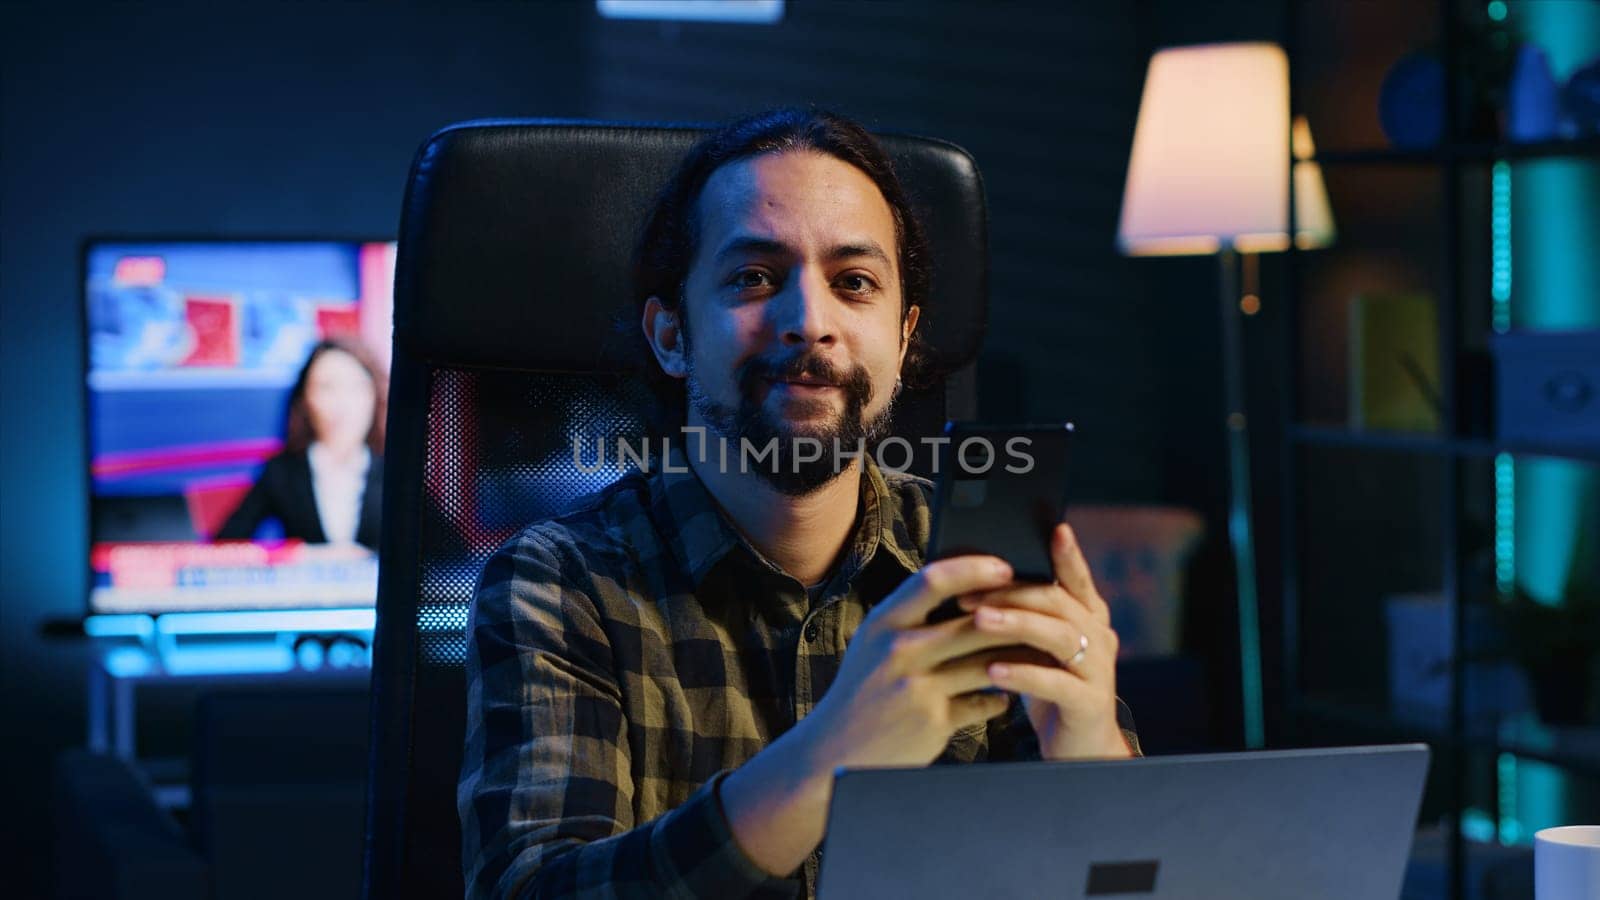 Man relaxing in apartment sitting at office desk, texting friends on cellphone, enjoying leisure time. Smiling remote worker taking break to talk with mates on internet using phone, camera A